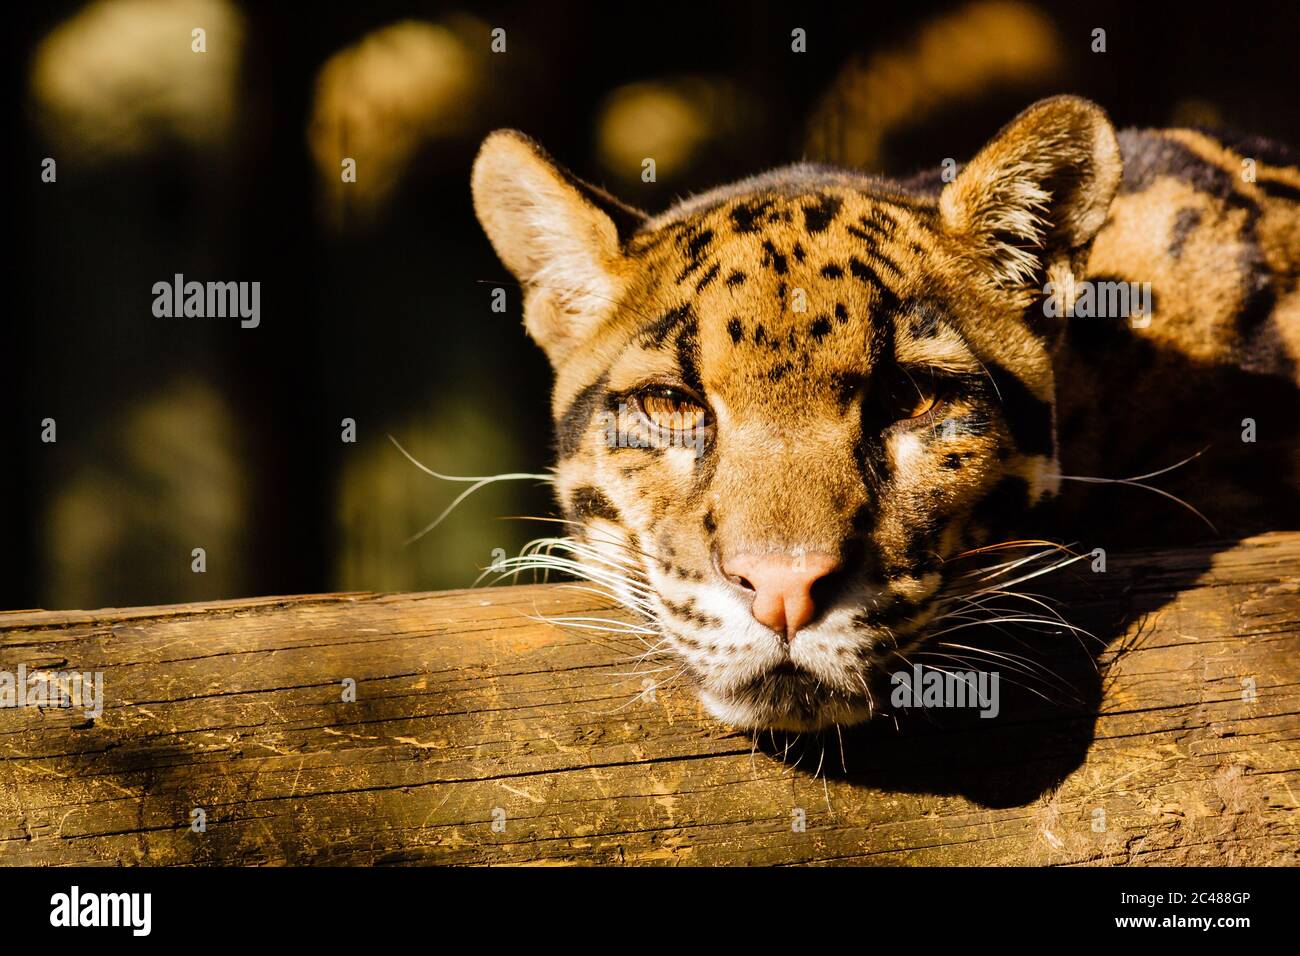 Closeup shot of a young tiger resting on a piece of wood Stock Photo